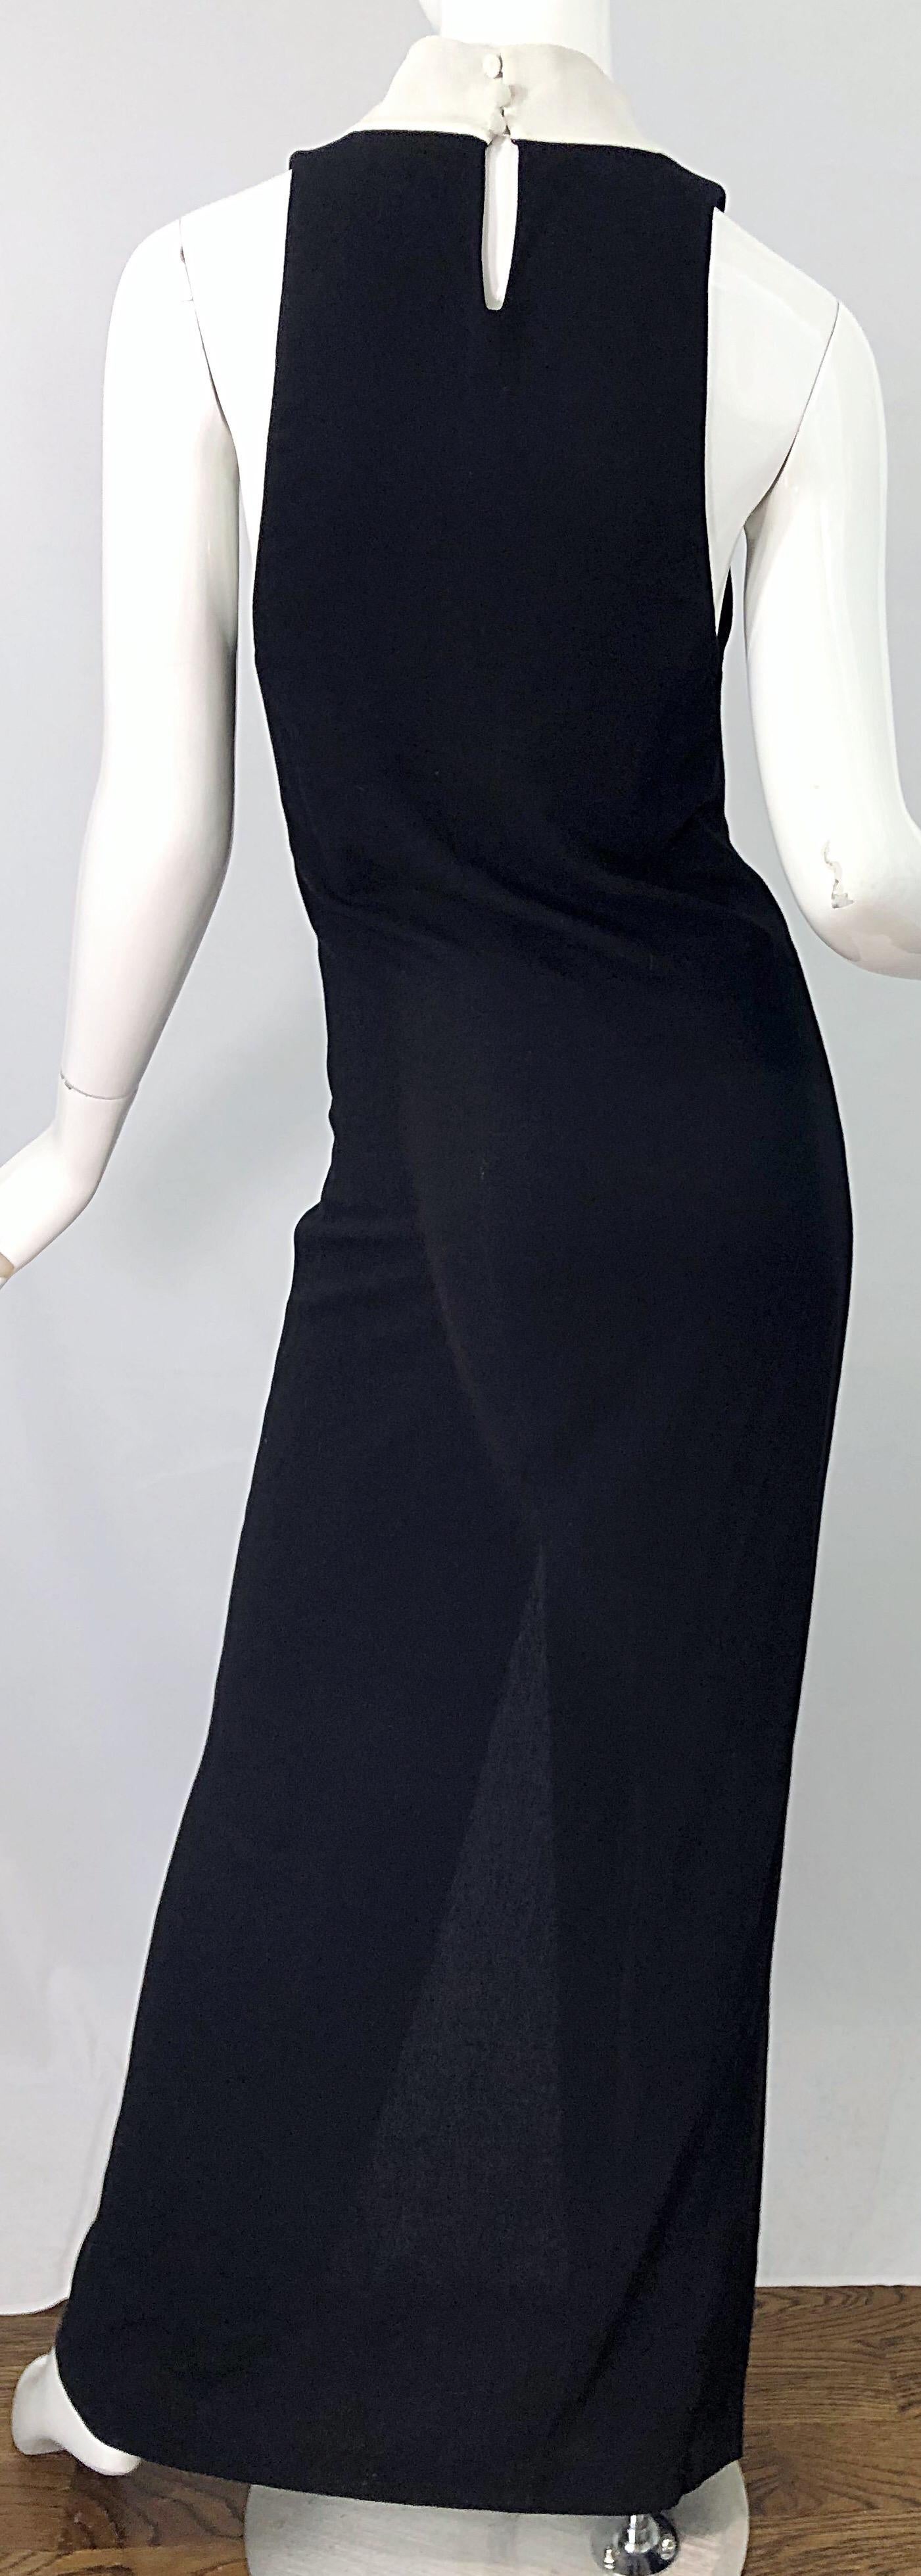 Yves Saint Laurent Tom Ford Black White Plunging Cleavage Cut Out Gown Dress For Sale 3